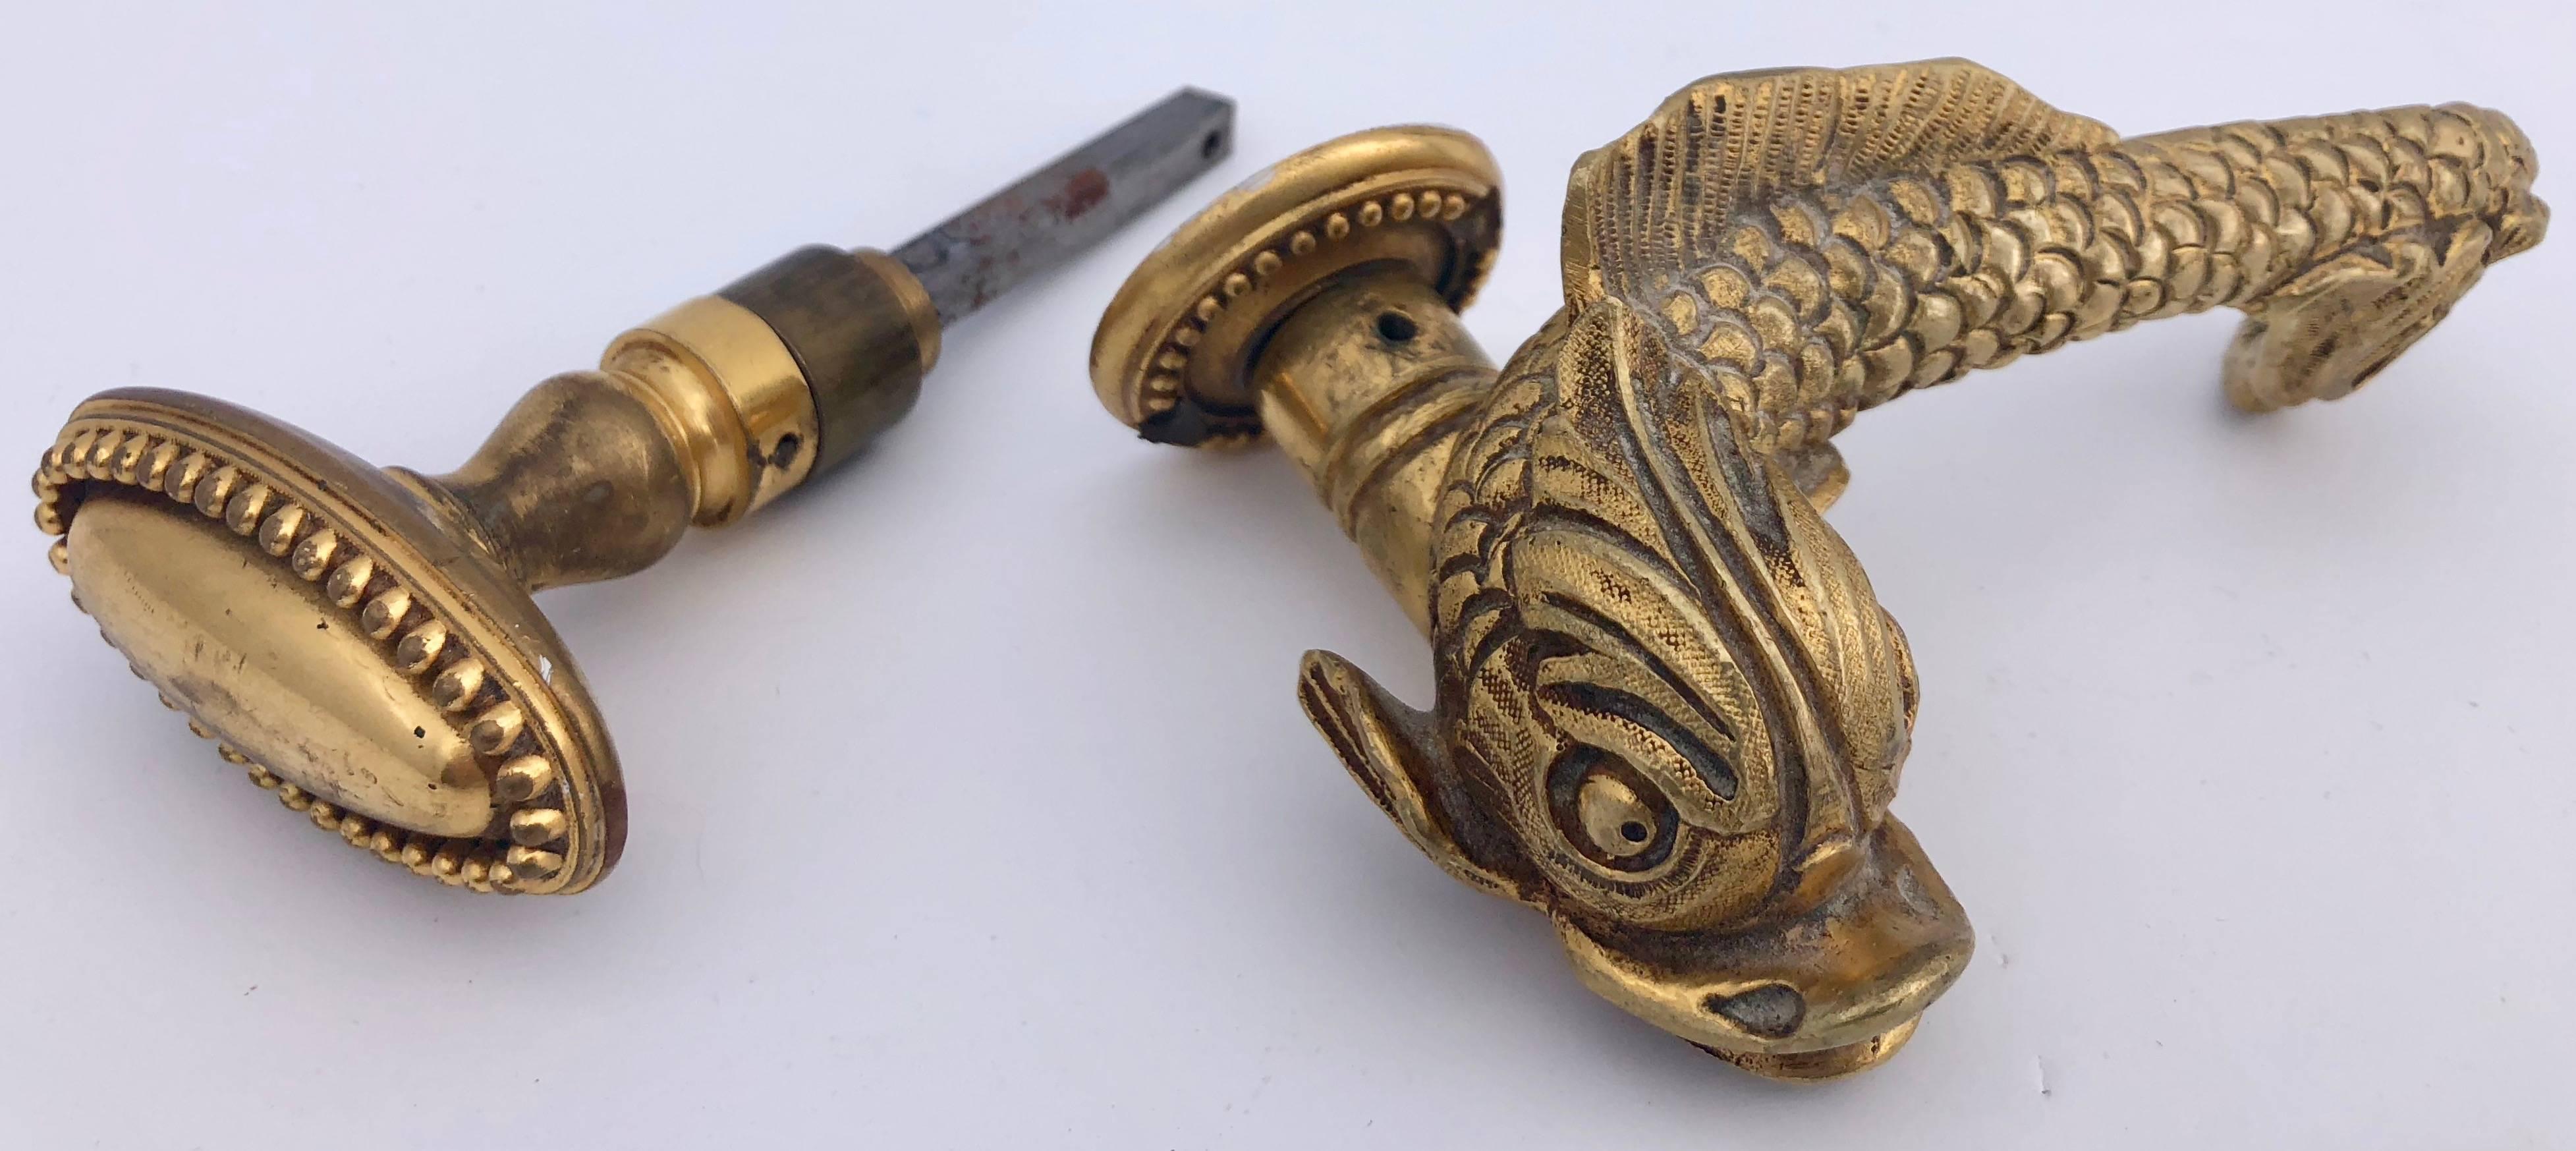 This great French 1950s bronze door handle and knob set are of a beautifully detailed dolphin, and an oval knob, both in the Napoleon III style. They come with their original bronze outer rings and square spindle. The dolphin figure is wonderful